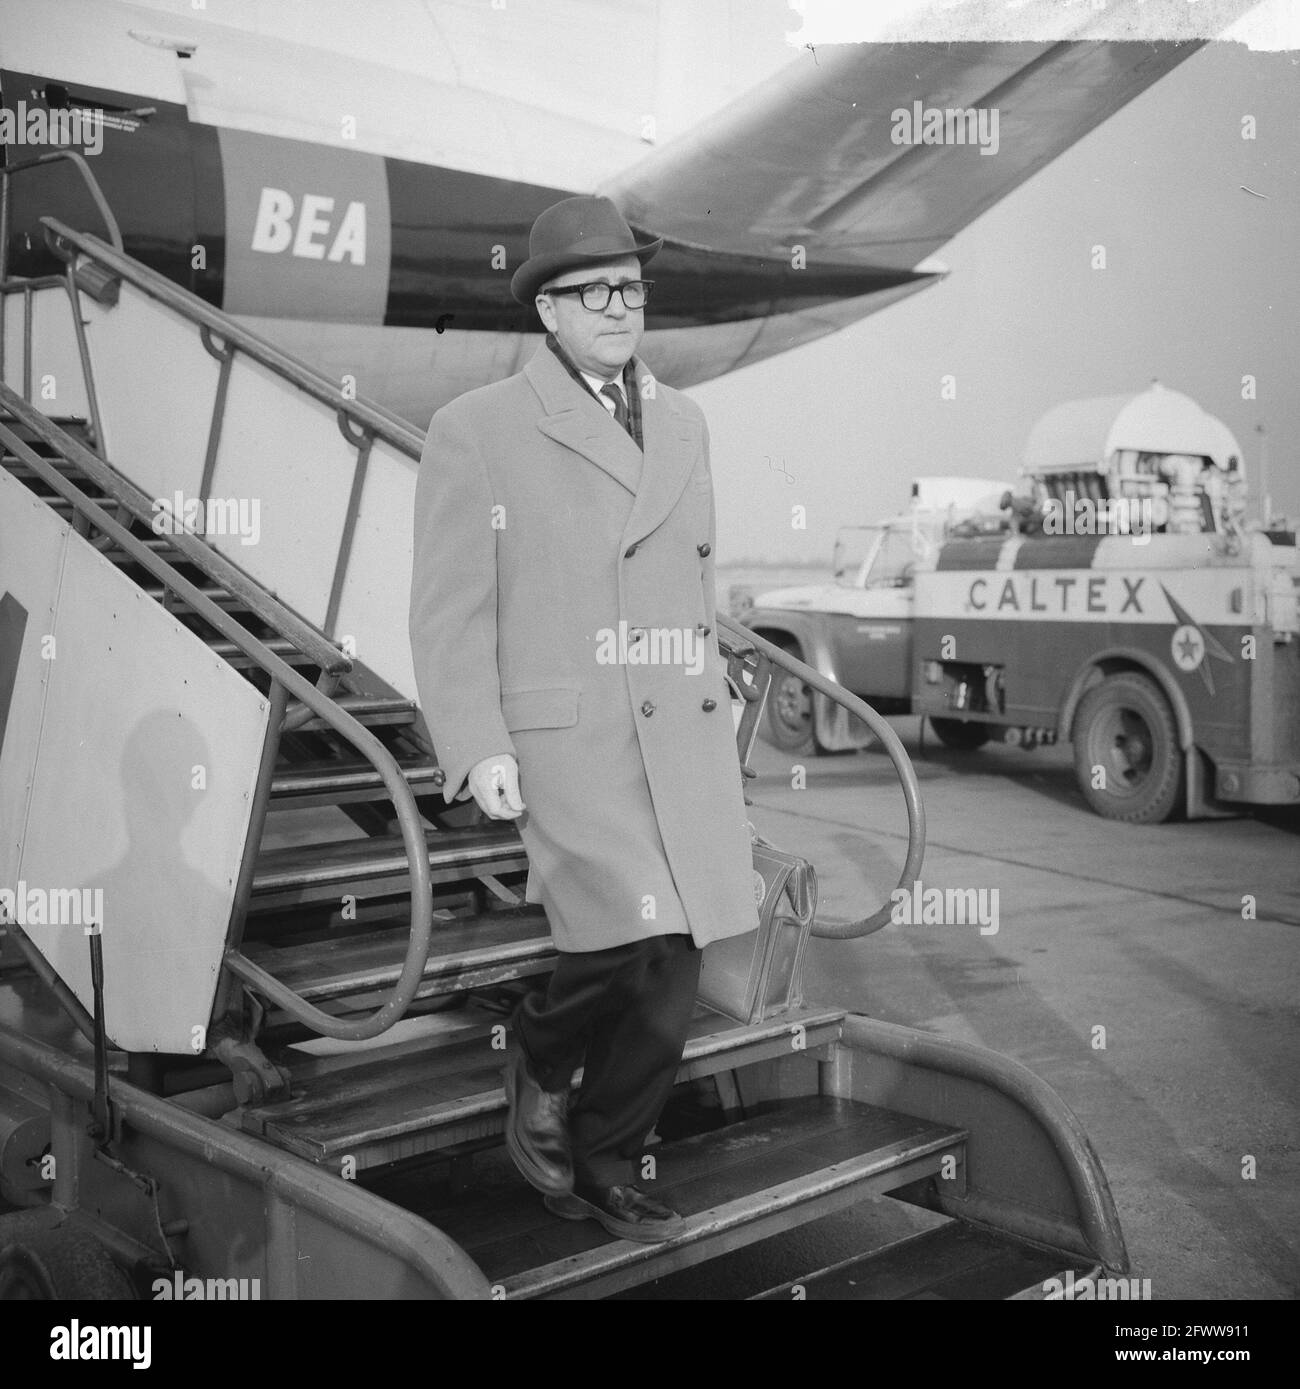 Commission E. Alderse Baes, arrival of Mr. Mac Shaver at Schiphol Airport, January 10, 1964, arrivals, The Netherlands, 20th century press agency photo, news to remember, documentary, historic photography 1945-1990, visual stories, human history of the Twentieth Century, capturing moments in time Stock Photo